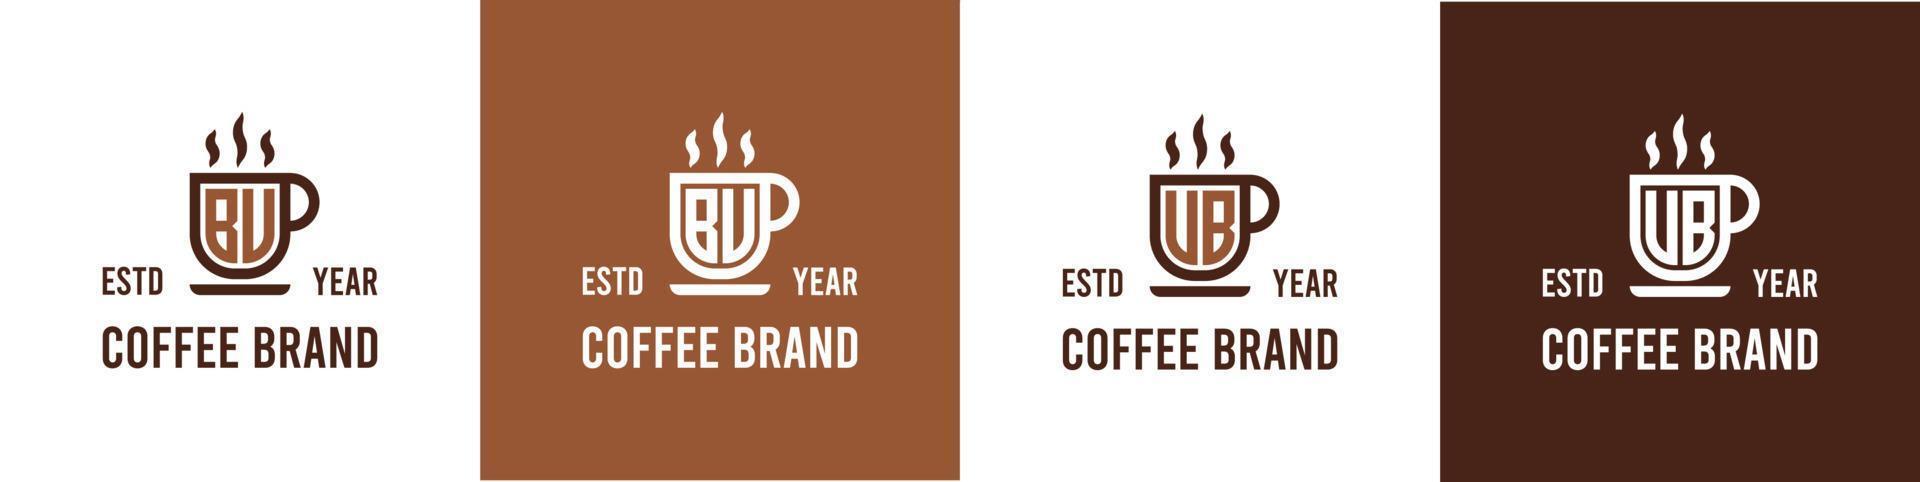 Letter BU and UB Coffee Logo, suitable for any business related to Coffee, Tea, or Other with BU or UB initials. vector